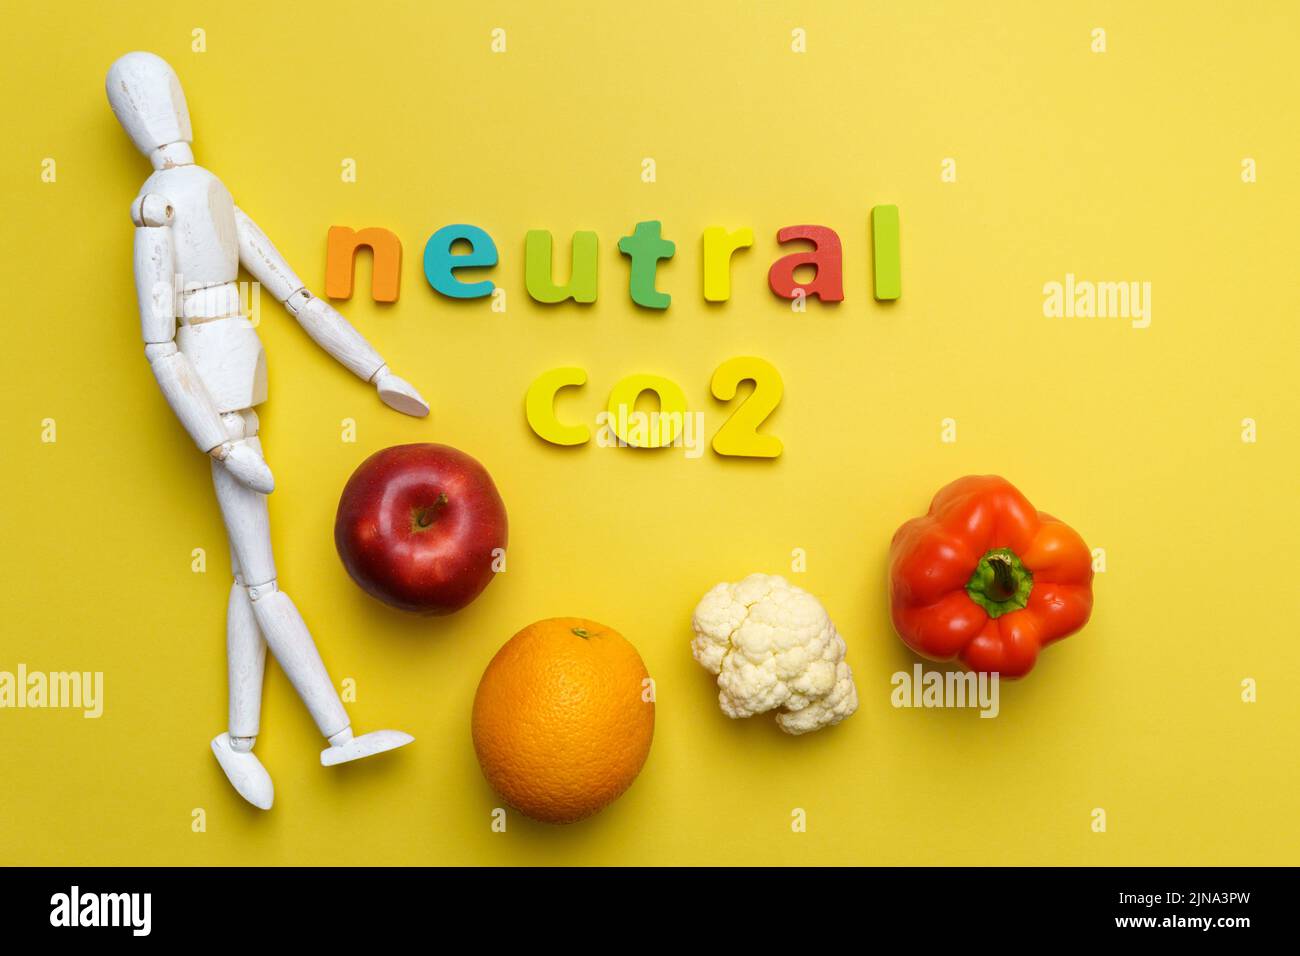 Local organic vegetables and fruits with carbon neutral emission label. Top view. Yellow background Stock Photo